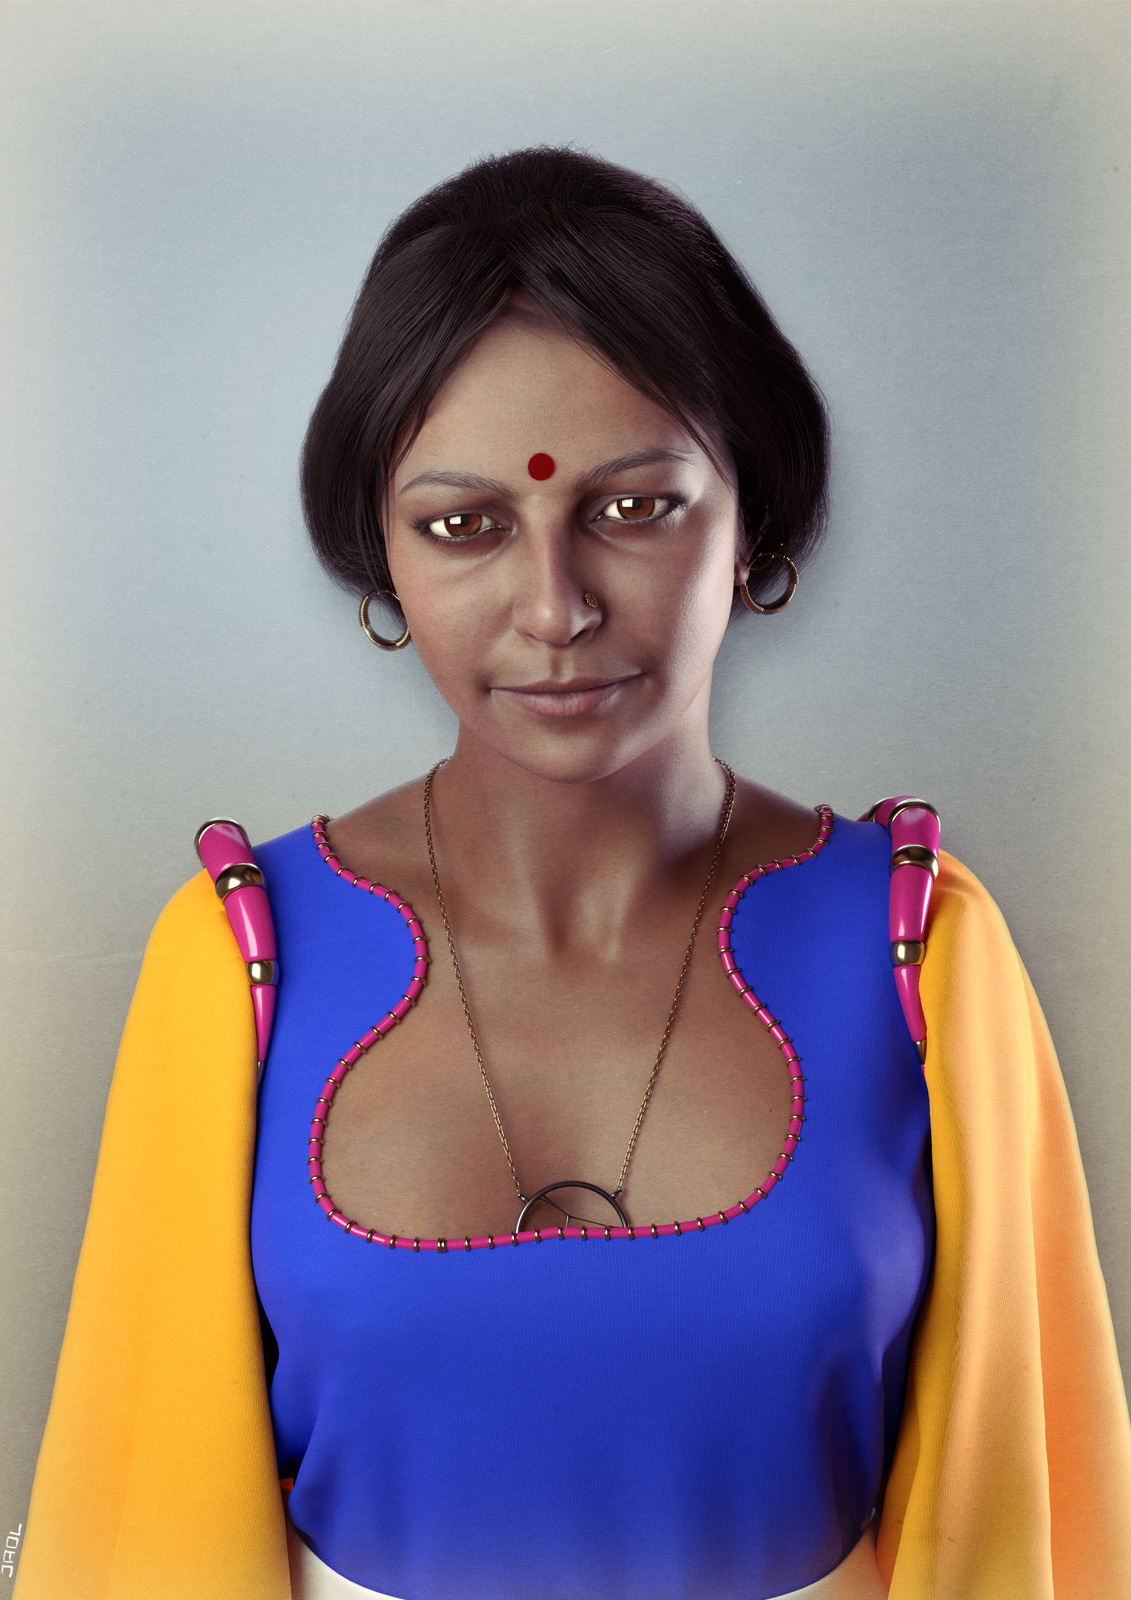 Indian woman - Finished Projects - Blender Artists Community